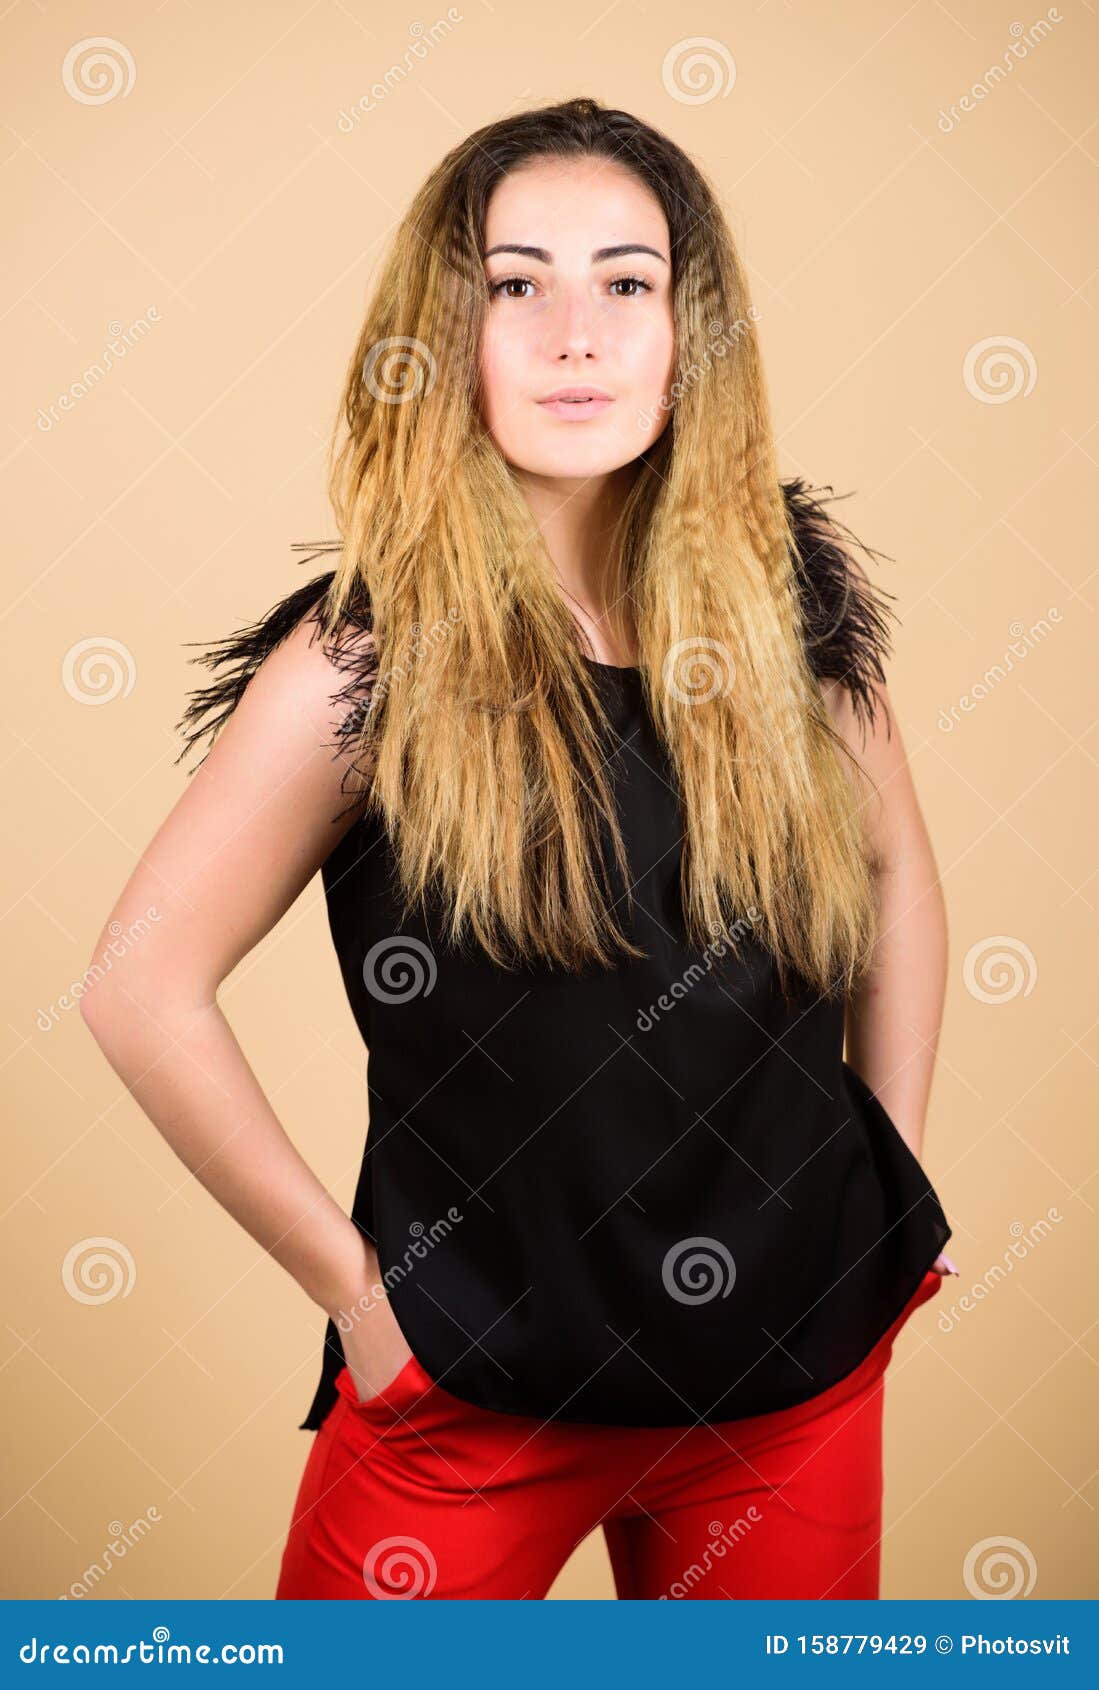 1,141 Crimp Hair Royalty-Free Photos and Stock Images | Shutterstock